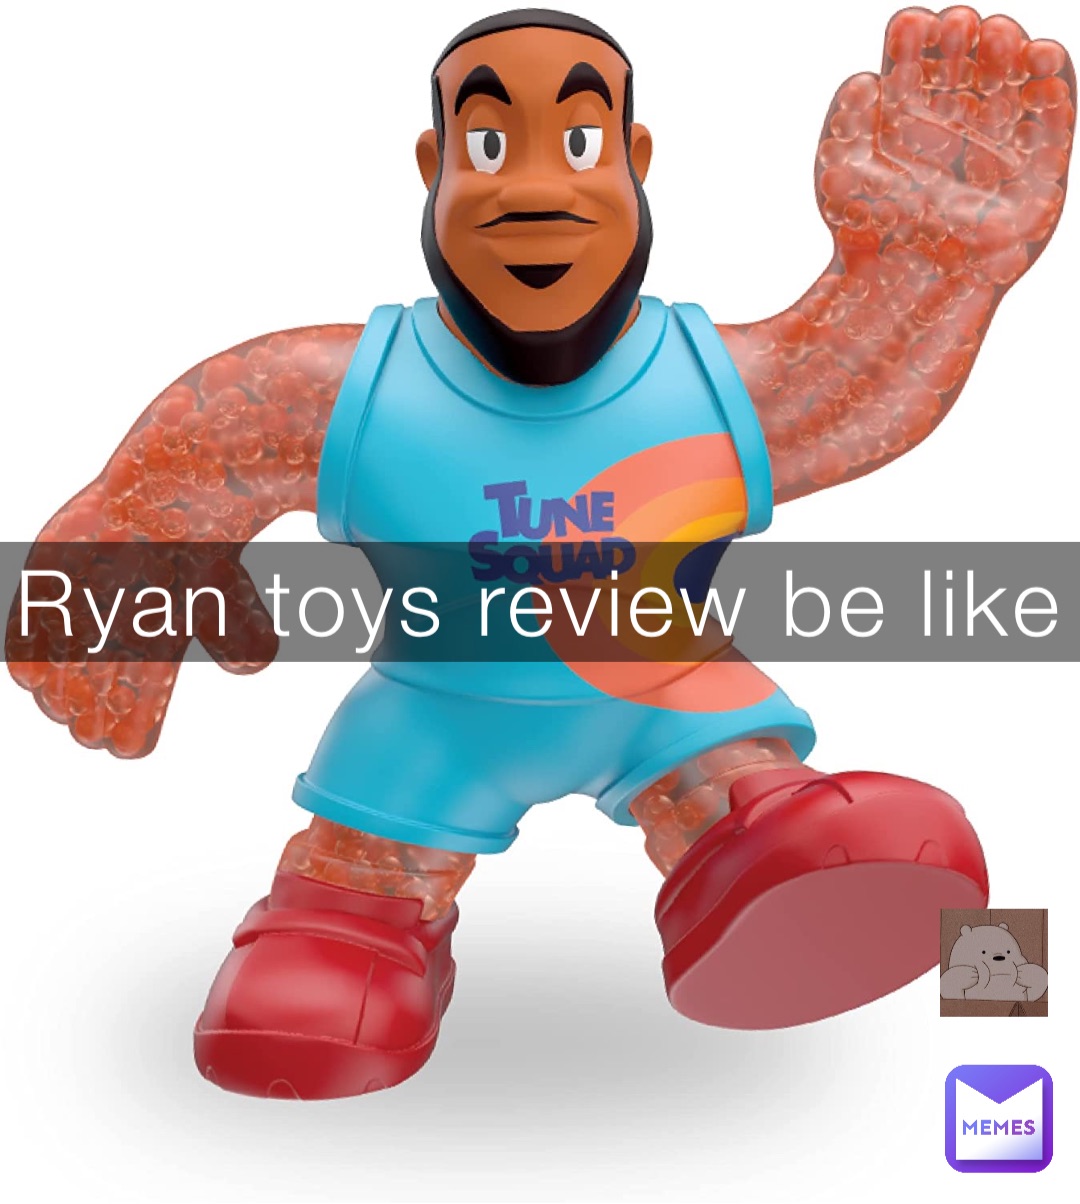 Ryan toys review be like